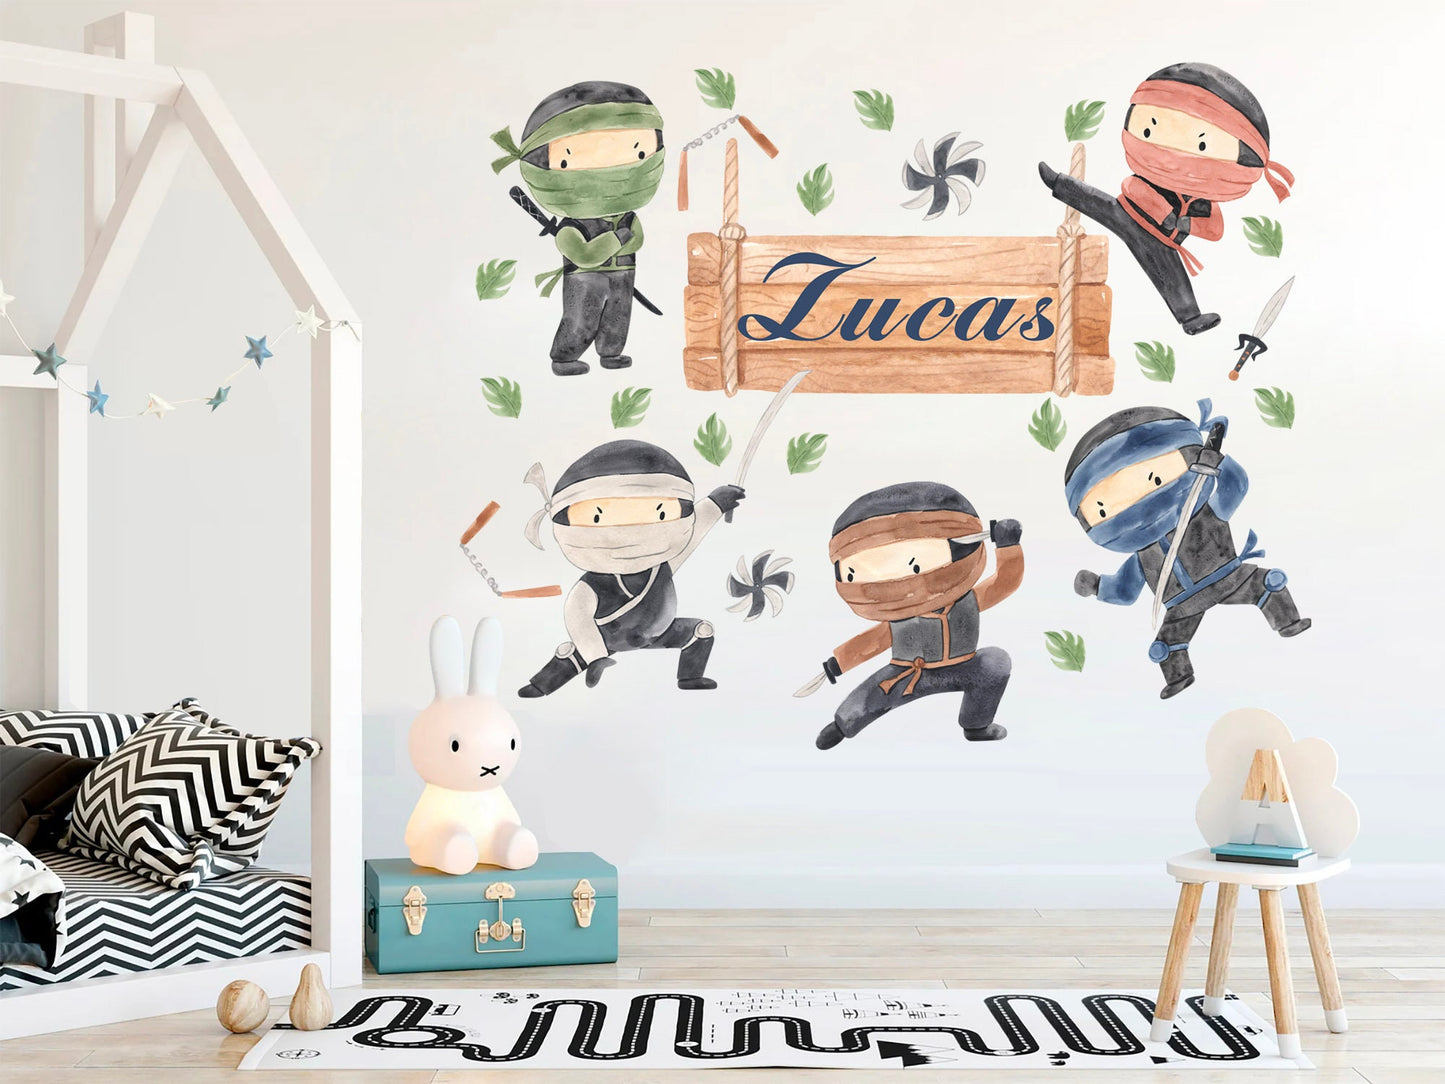 Personalized Name Customizable Ninja Warriors Action Wood Plaque Wall Decal - BR304